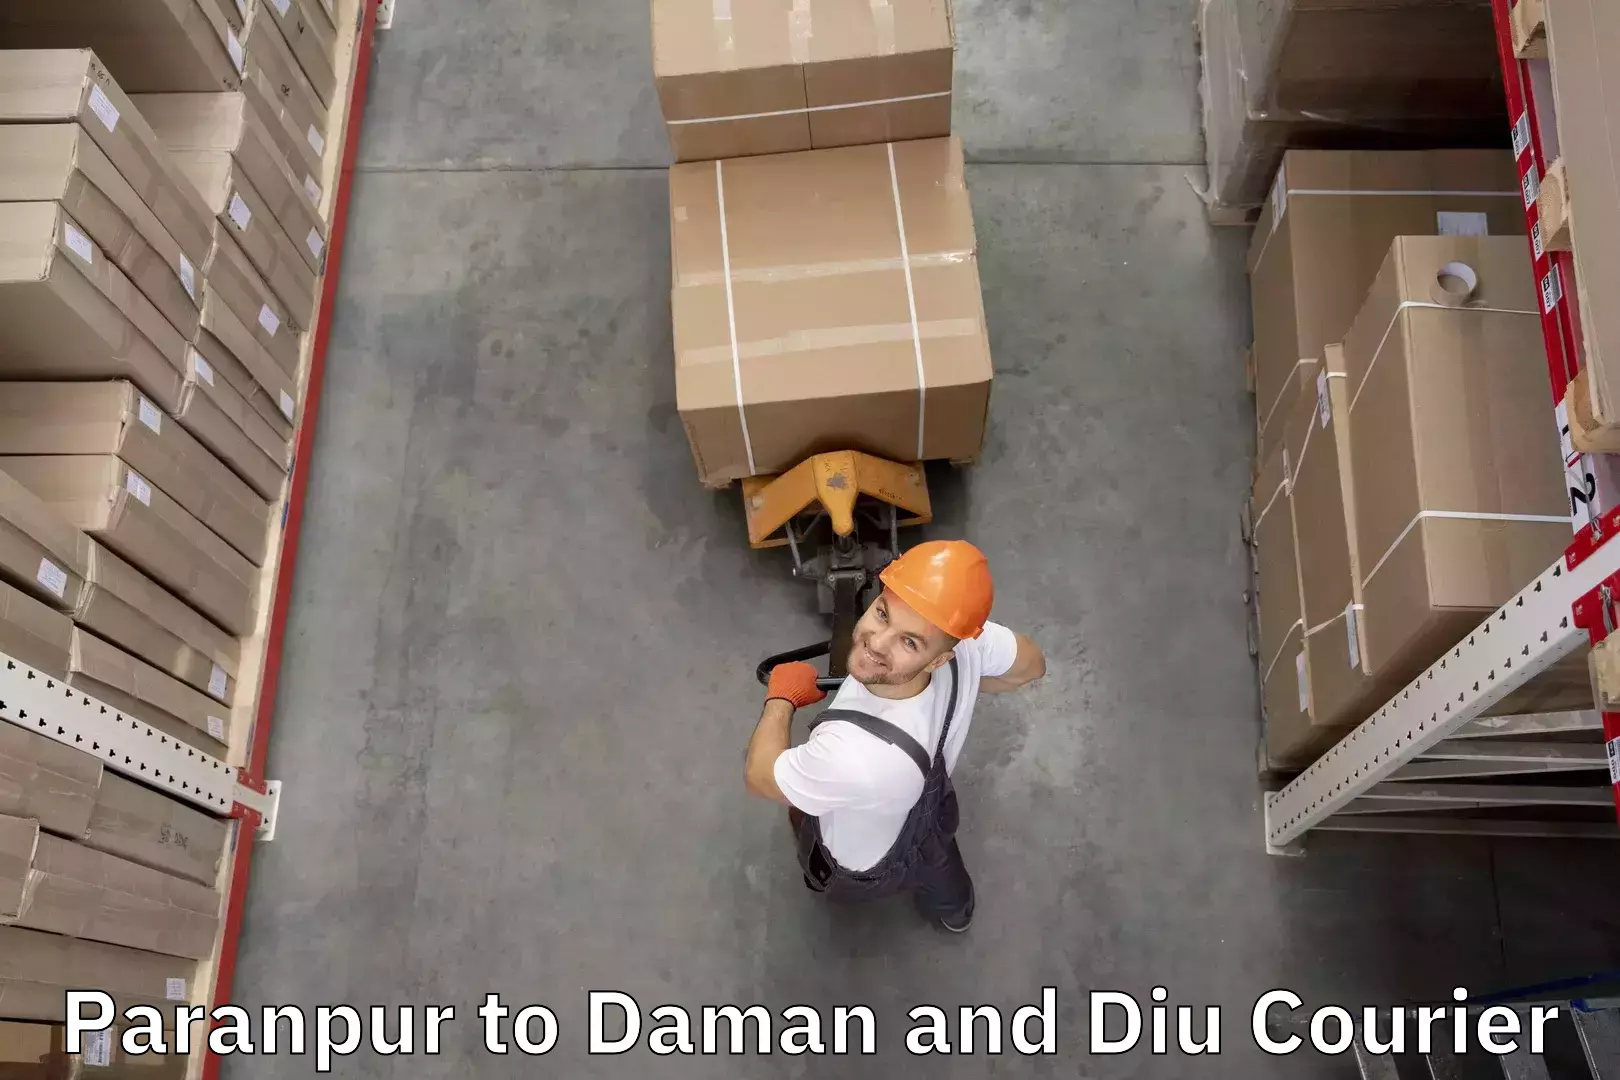 Luggage shipment specialists Paranpur to Daman and Diu